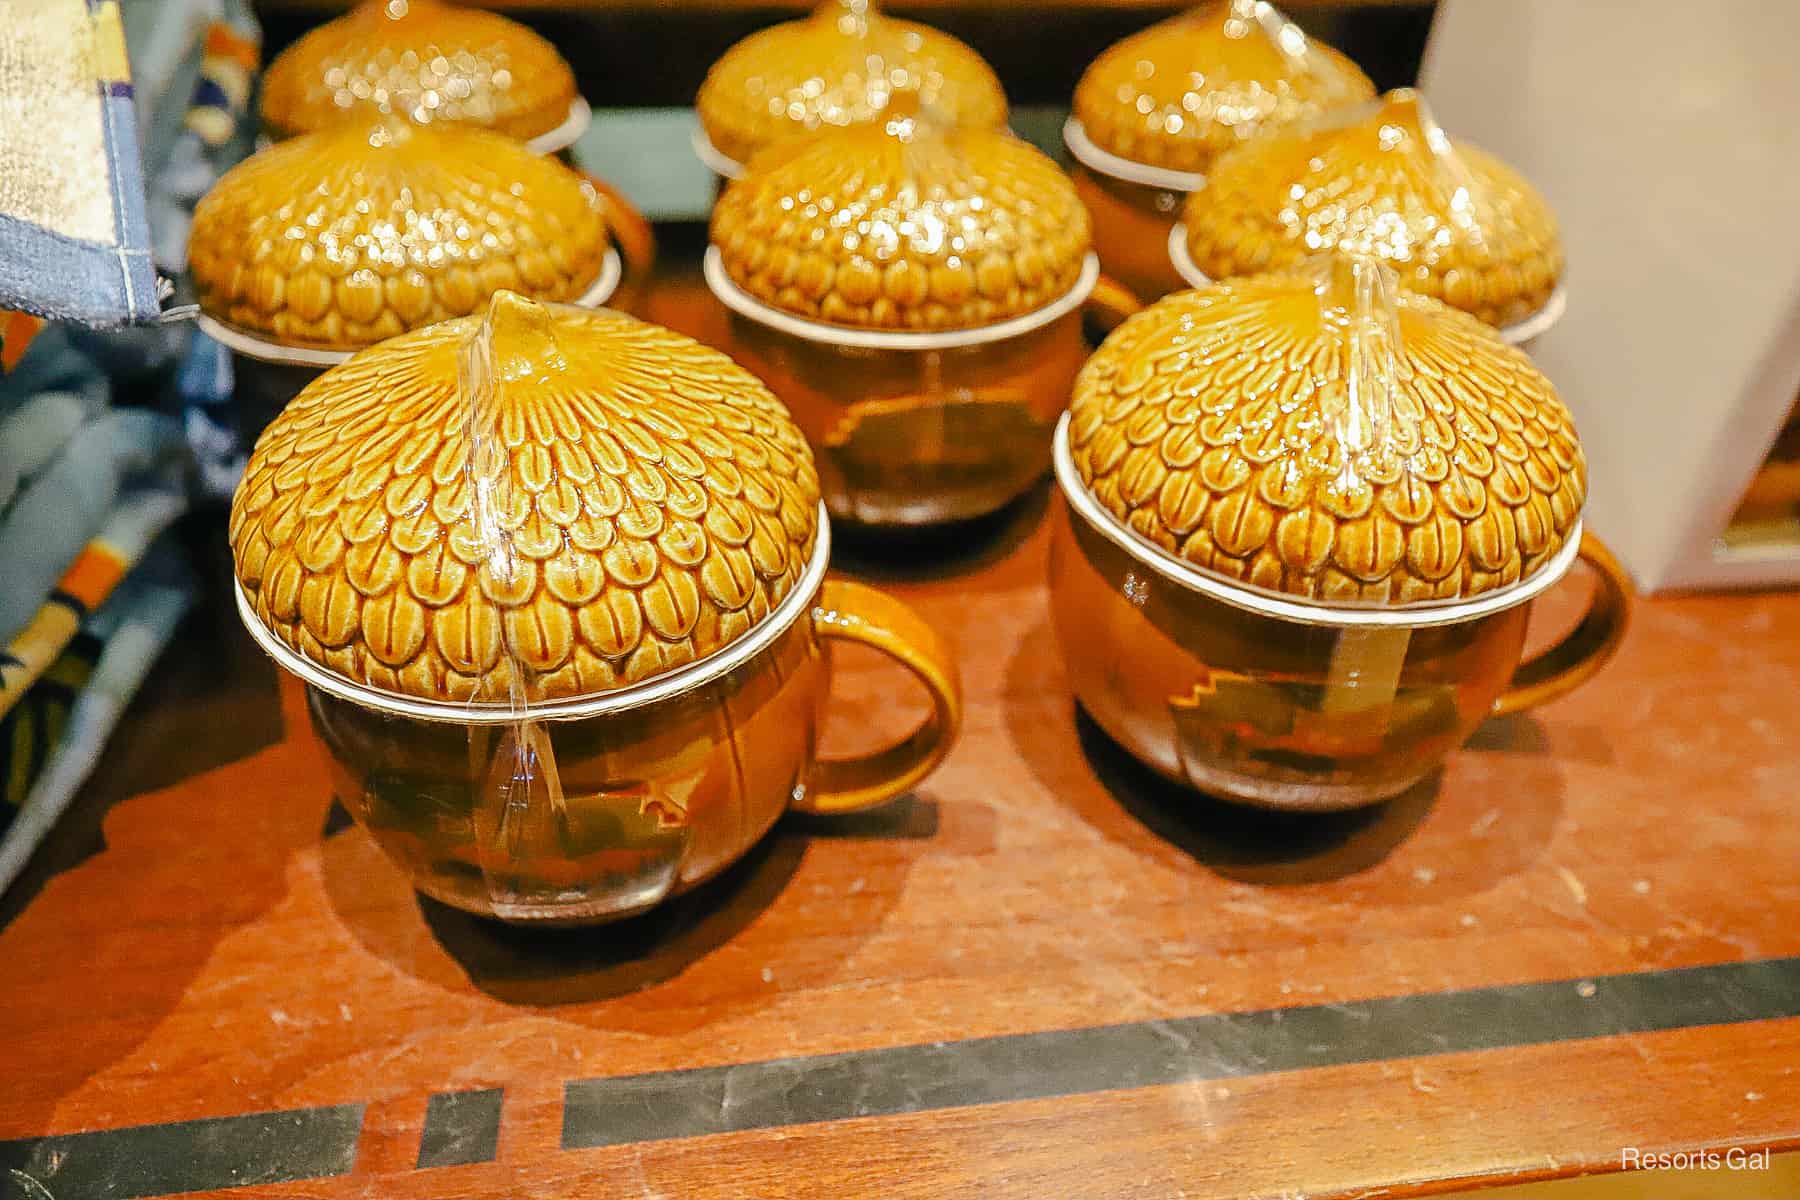 acorn shaped mugs with lids that look like the top of an acorn 